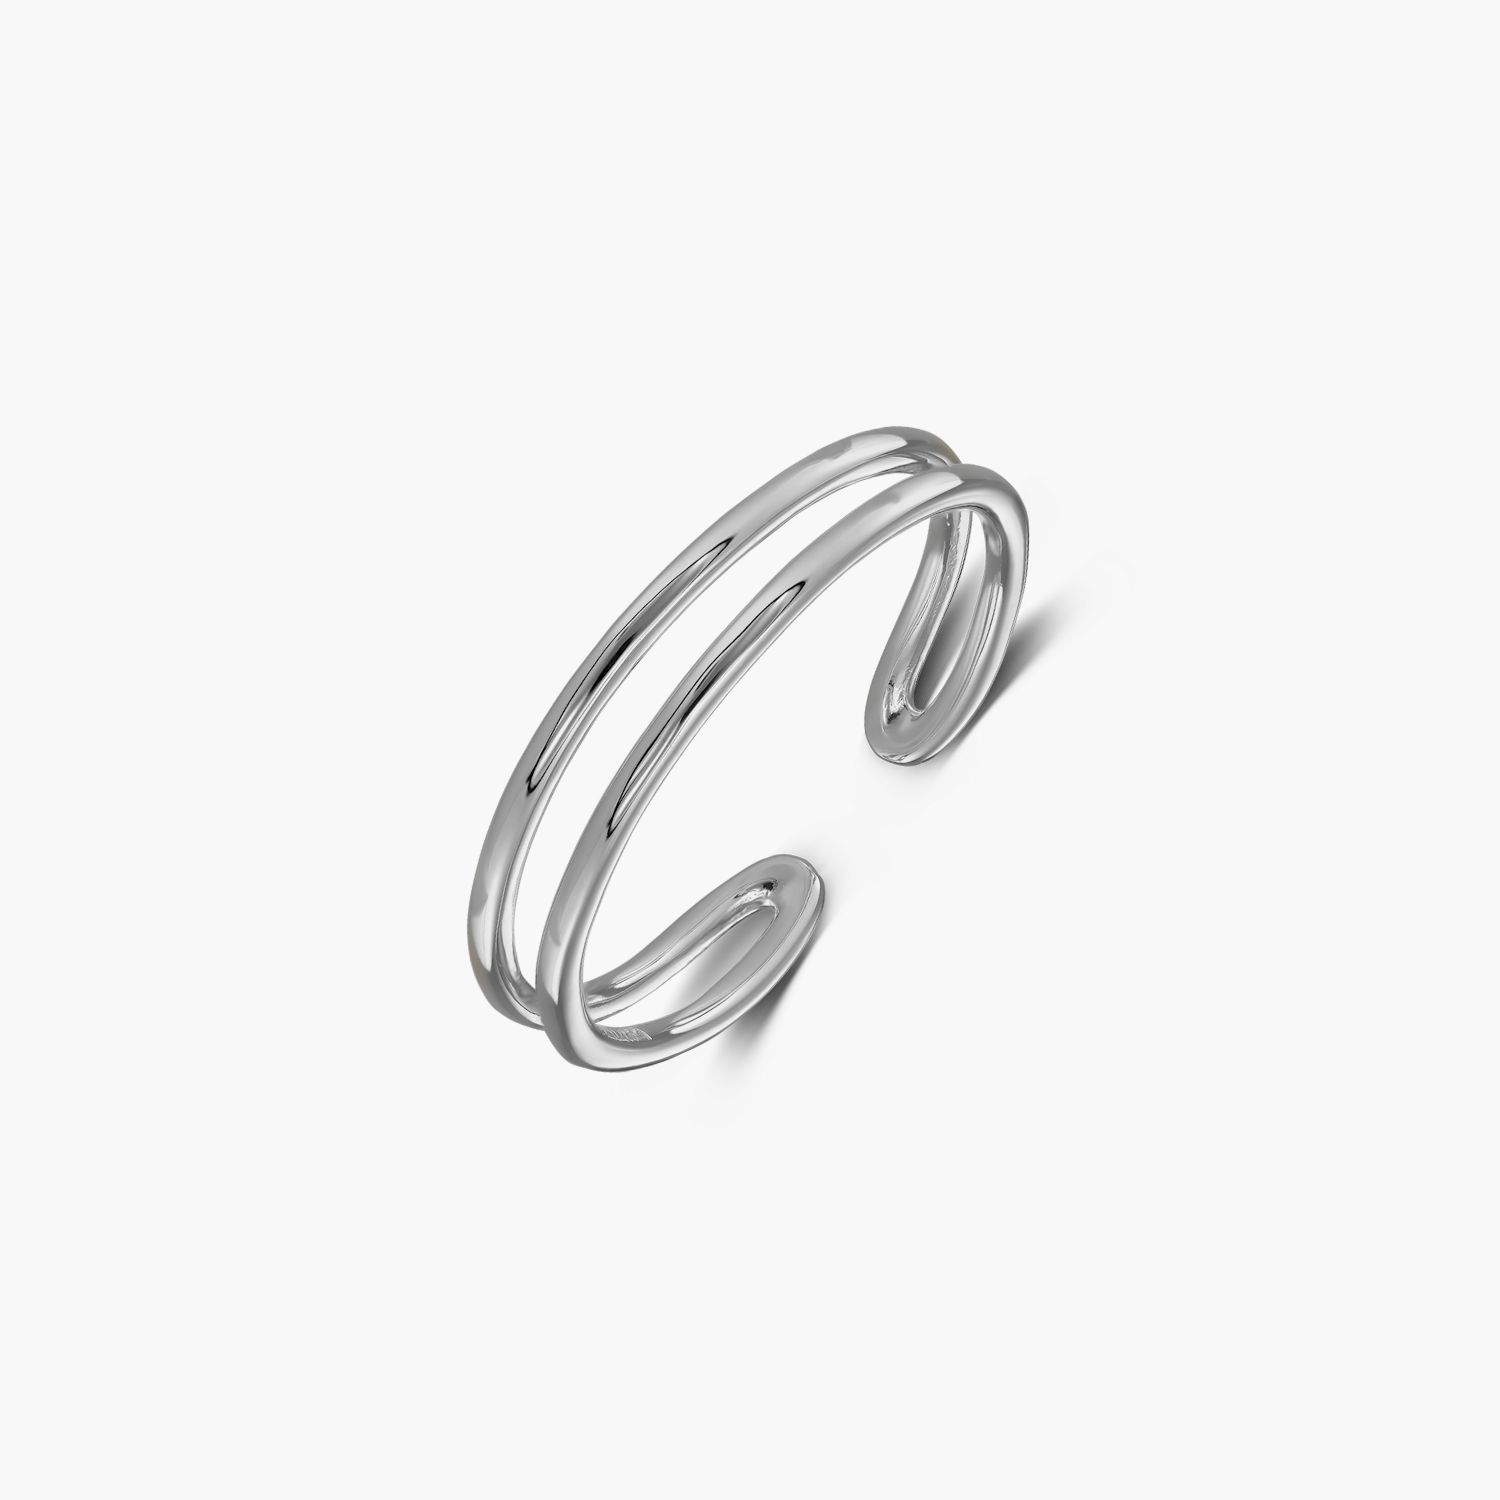 Axis silver ring